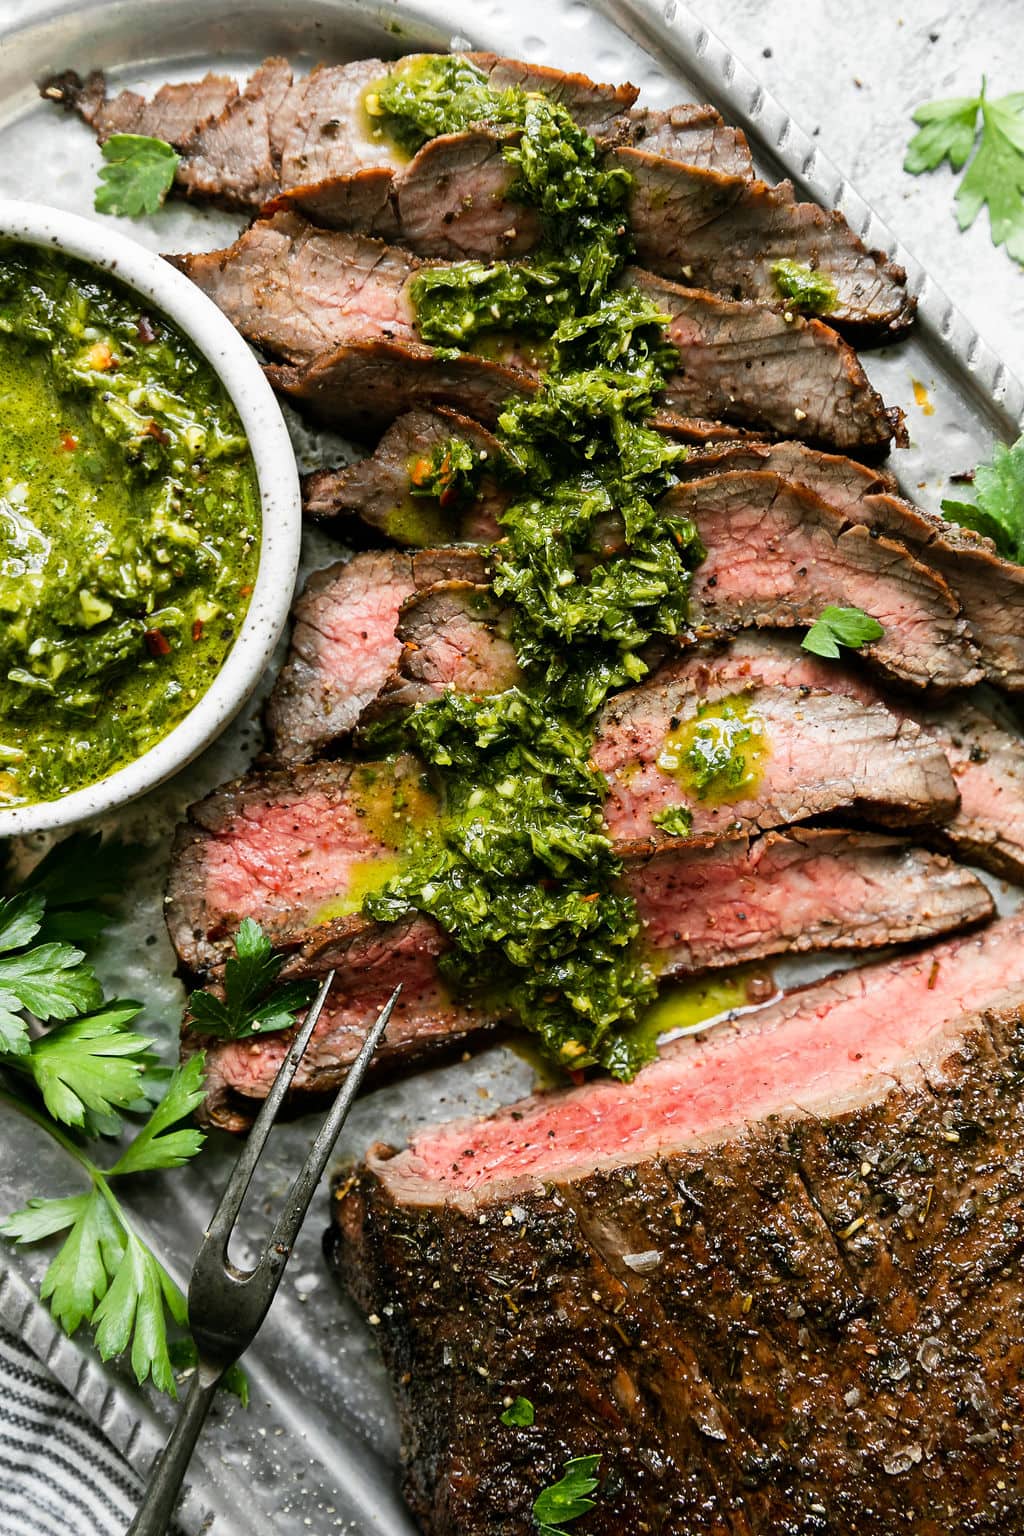 Grilled Flank Steak Recipe with Balsamic and Garlic